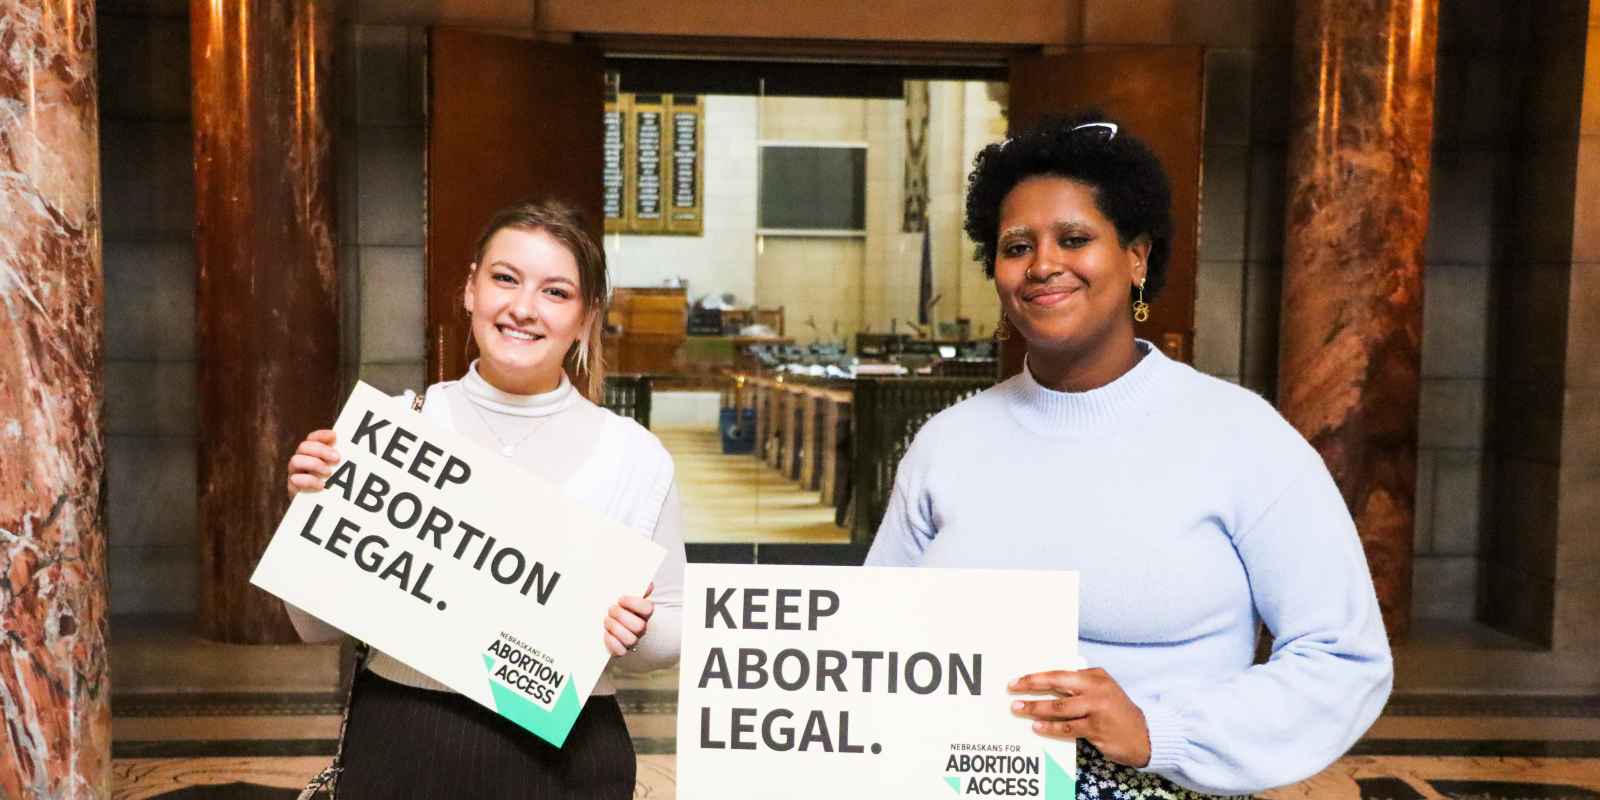 Advocates hold signs reading "Keep Abortion Legal."